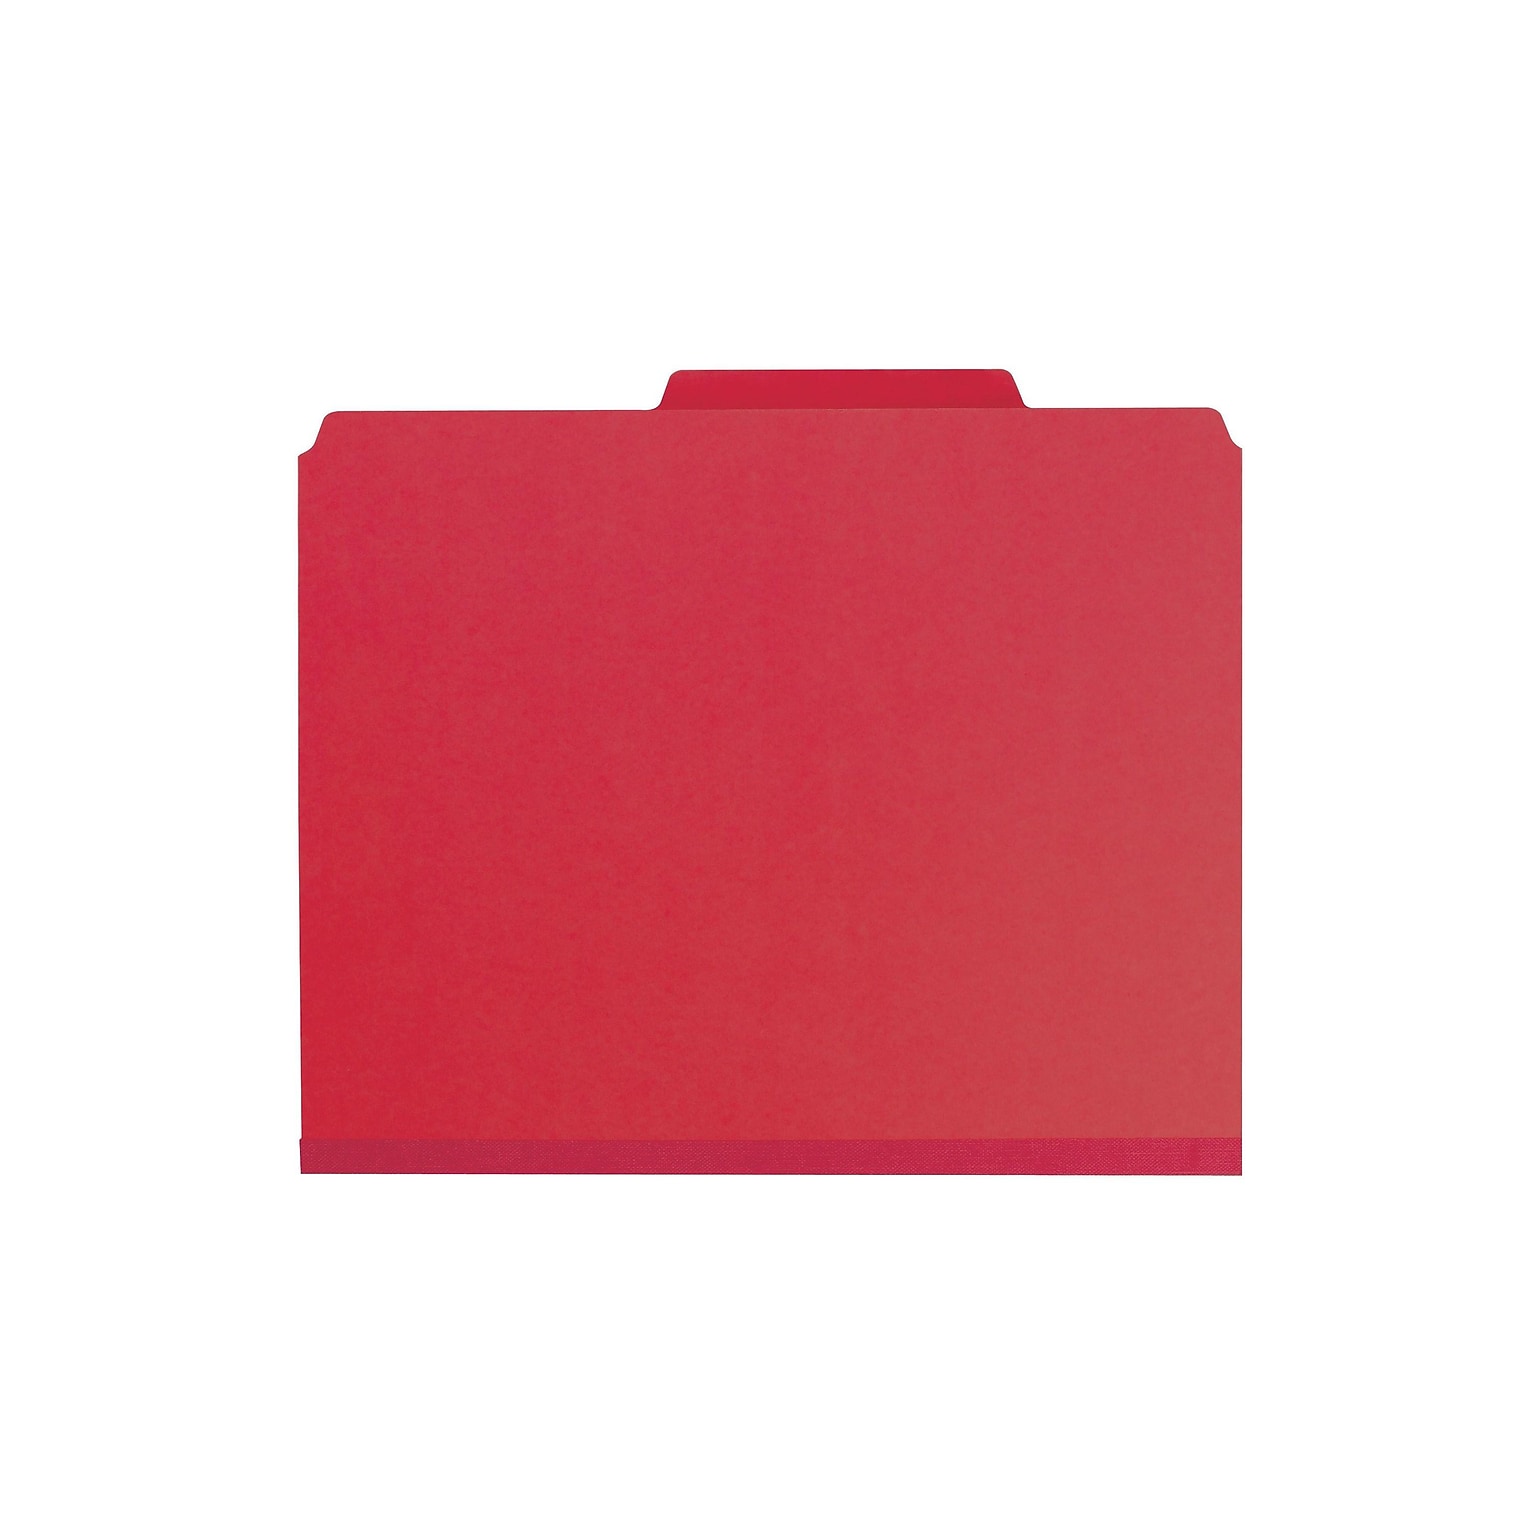 Smead Classification Folders with SafeSHIELD Fasteners, 3 Expansion, Letter Size, 3 Dividers, Bright Red, 10/Box (14095)